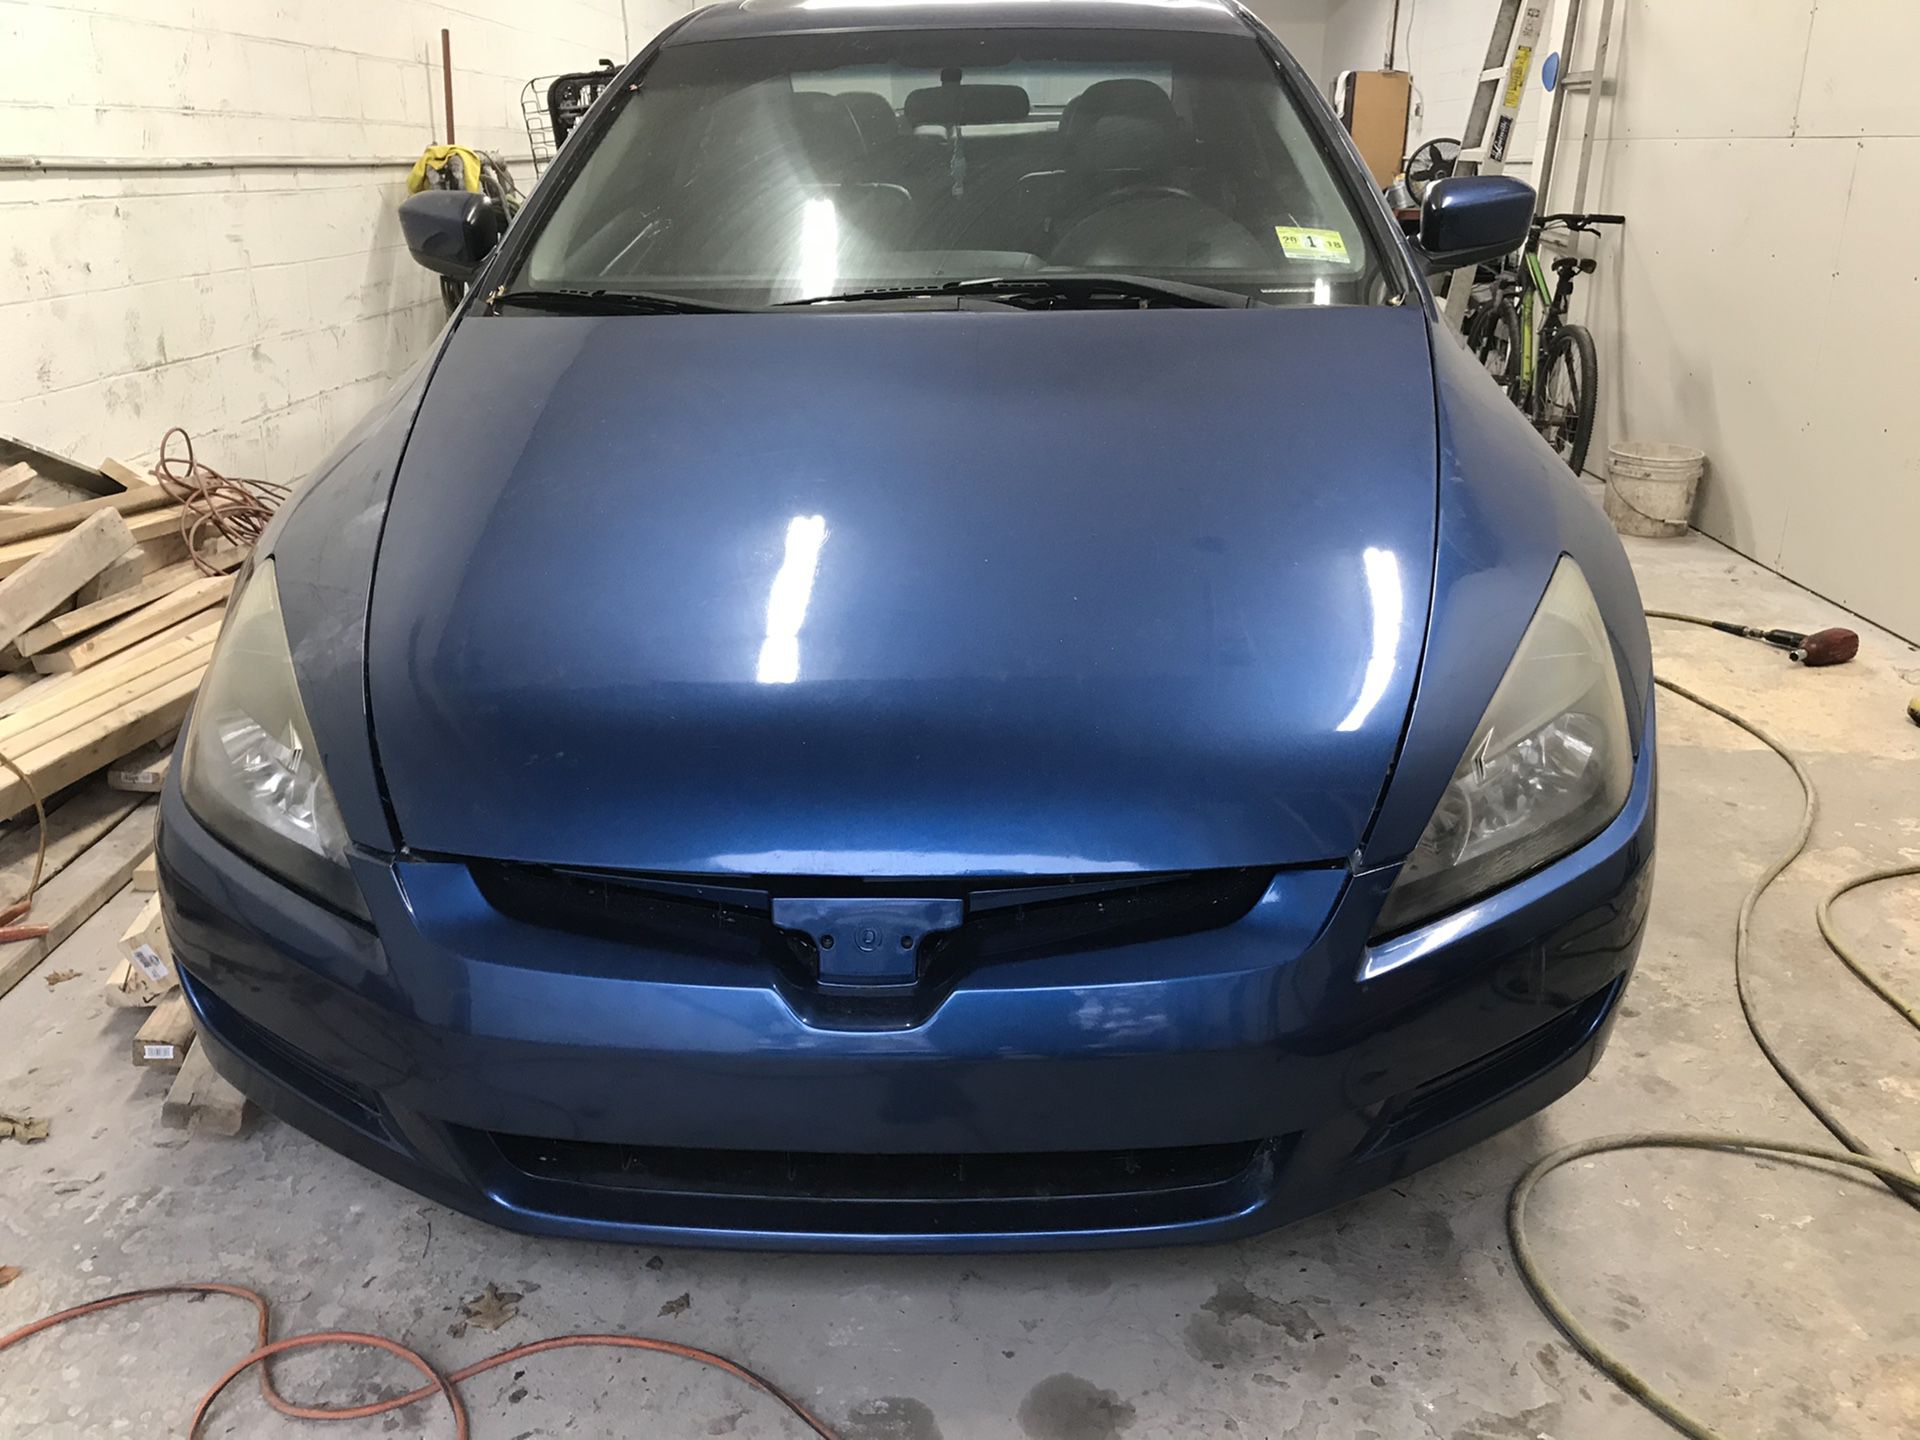 Honda 2004 Accord coupe for parts